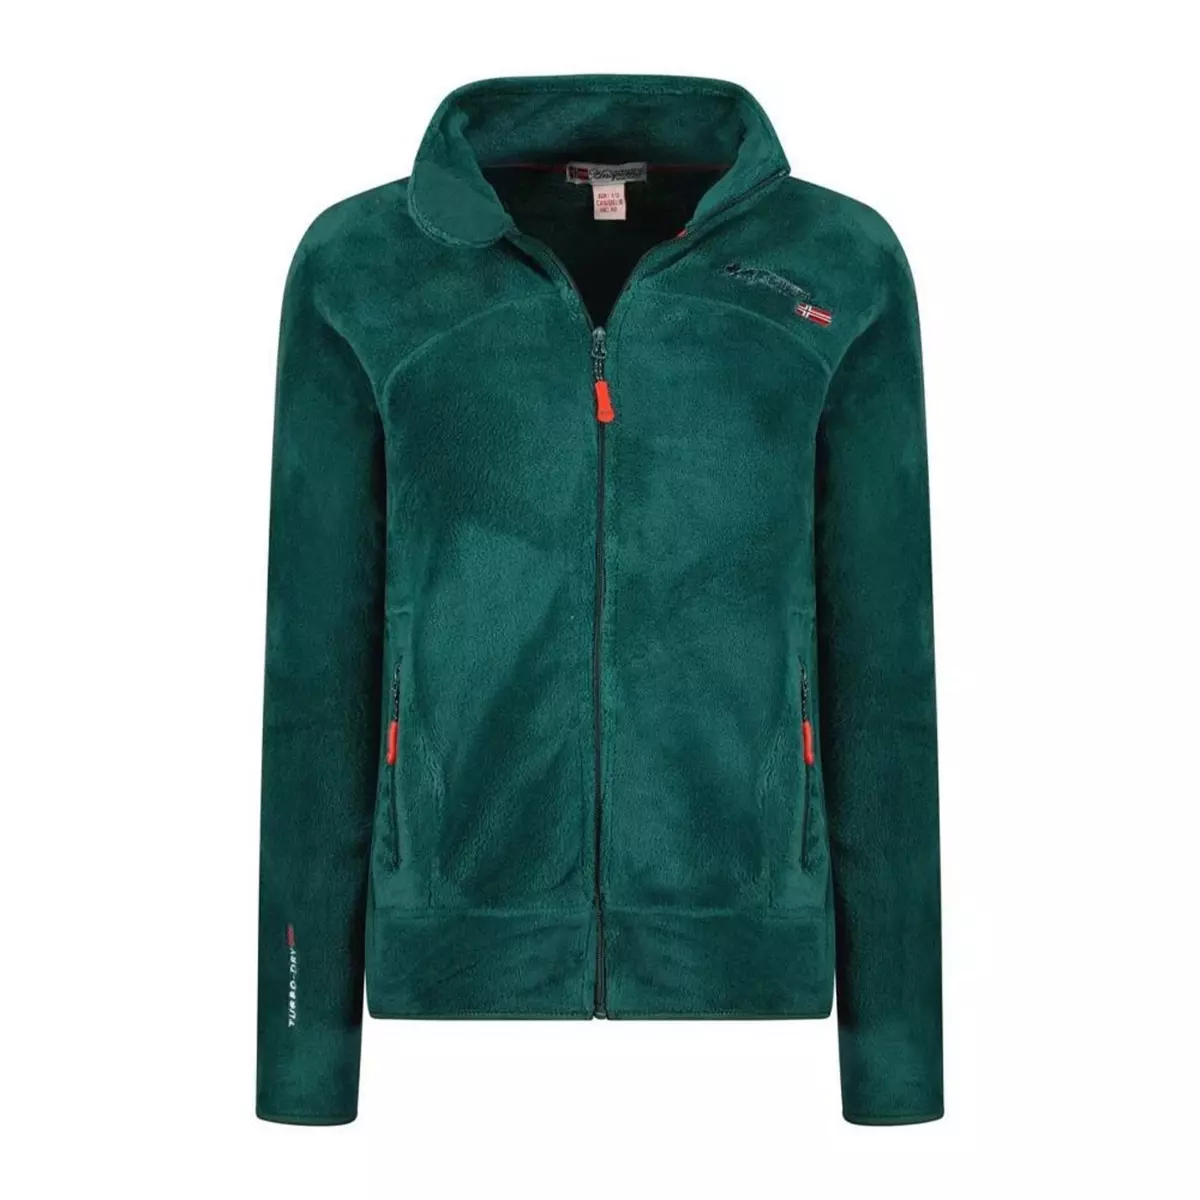 GEOGRAPHICAL NORWAY Veste polaire Vert Femme Geographical Norway Upaline